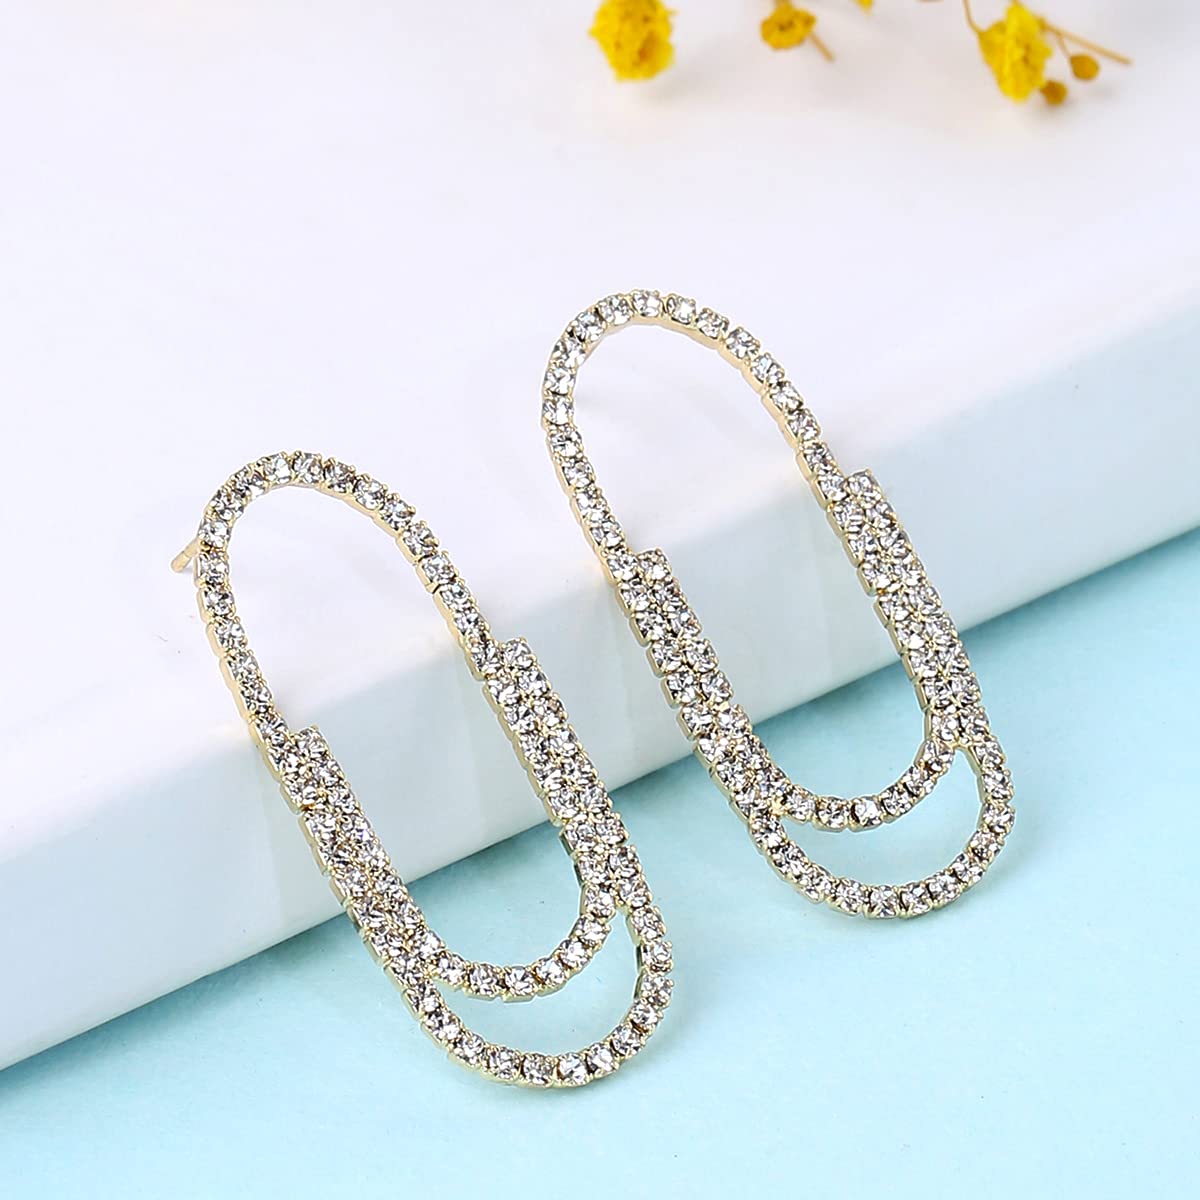 Yellow Chimes Earrings For Women Gold Tone Pin Shaped Sparkling Crystal Studded Drop Stud Earrings For Women and Girls